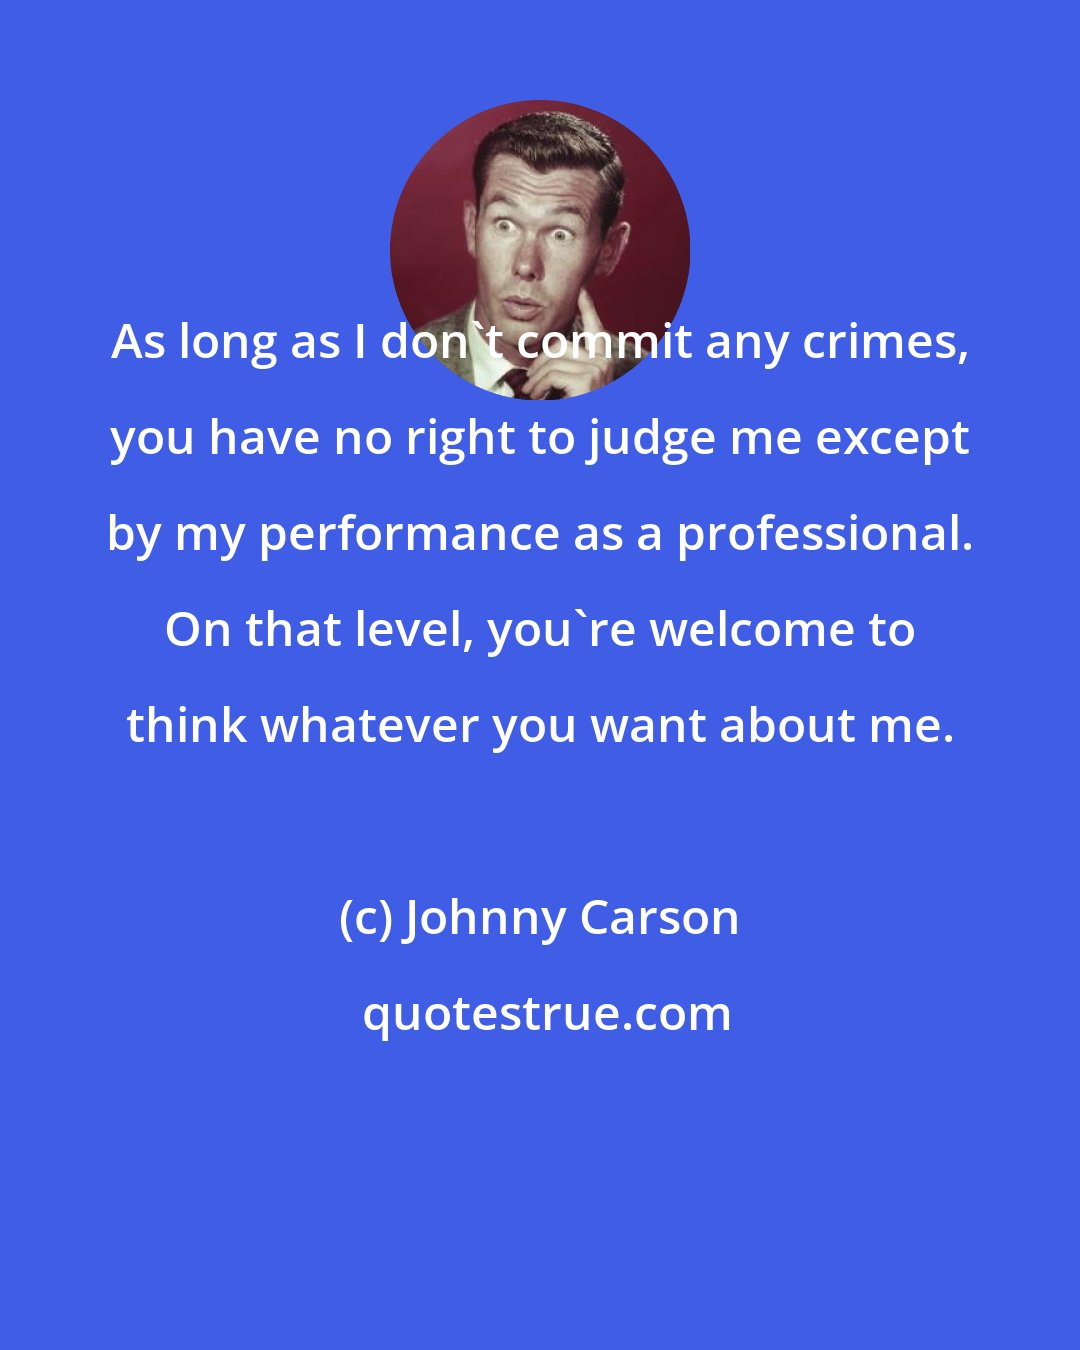 Johnny Carson: As long as I don't commit any crimes, you have no right to judge me except by my performance as a professional. On that level, you're welcome to think whatever you want about me.